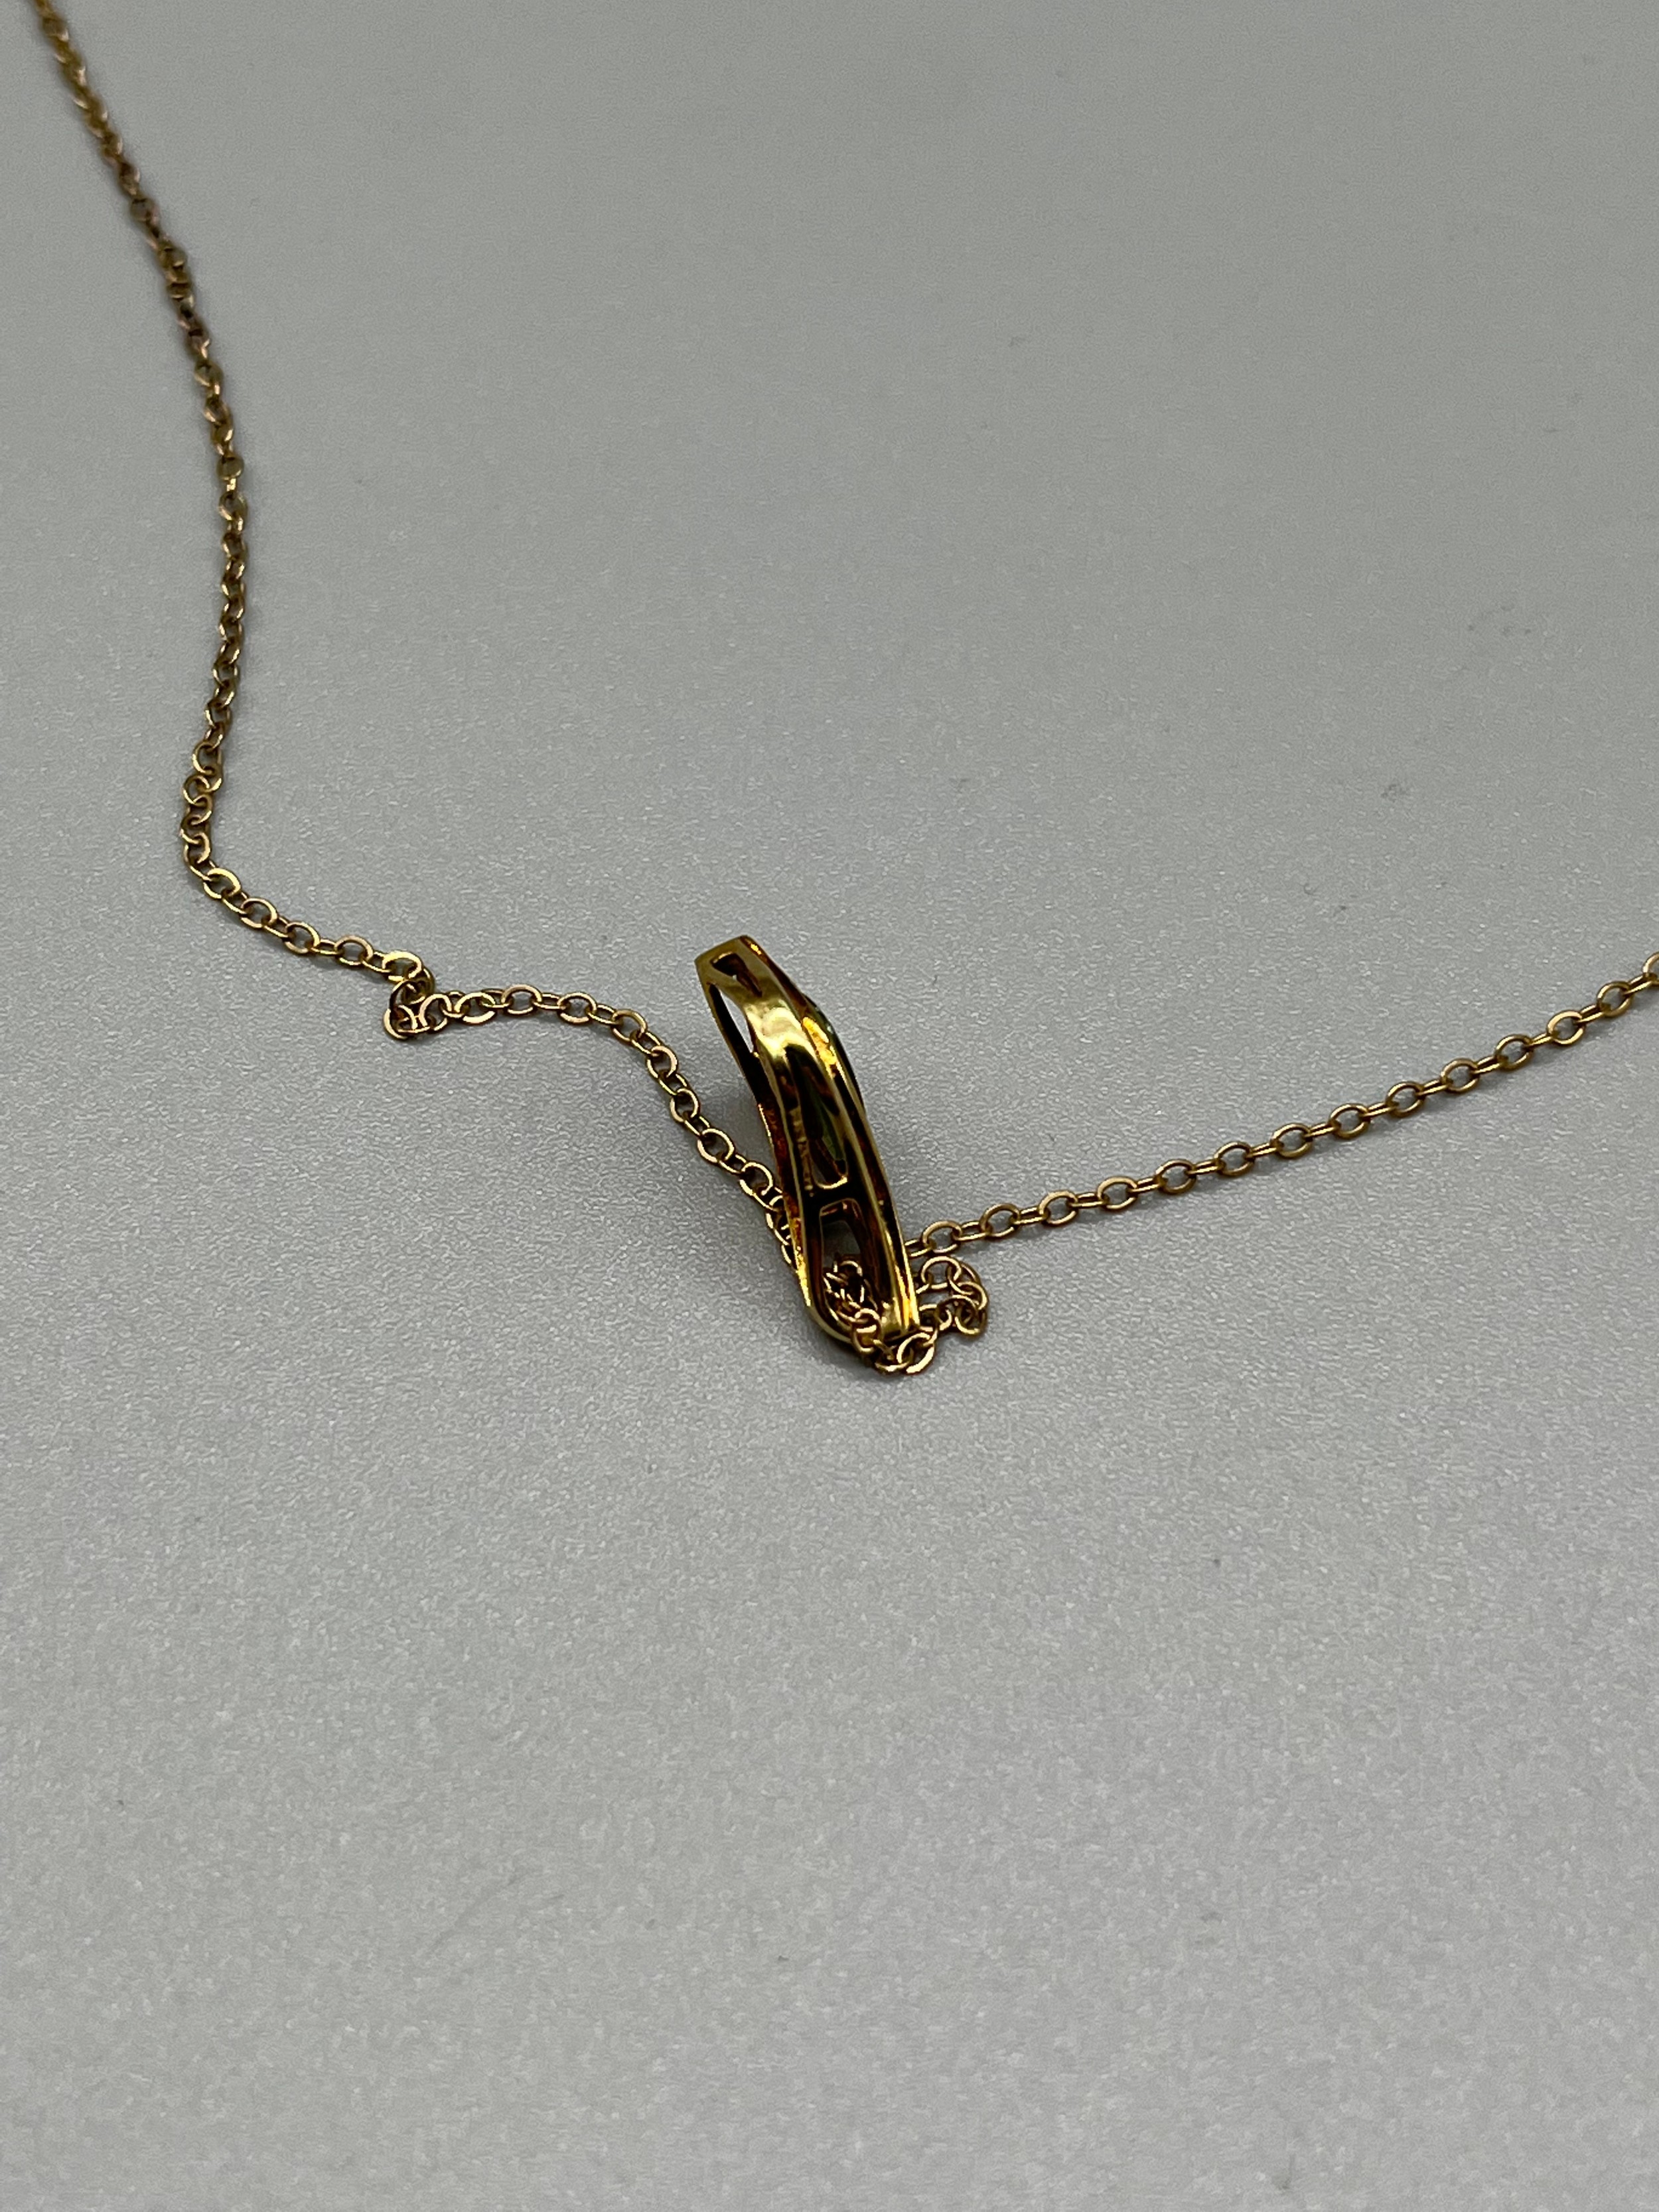 A 9ct gold pendant set with a jade stone and a 9ct gold necklace. [3.10grams] - Image 4 of 4